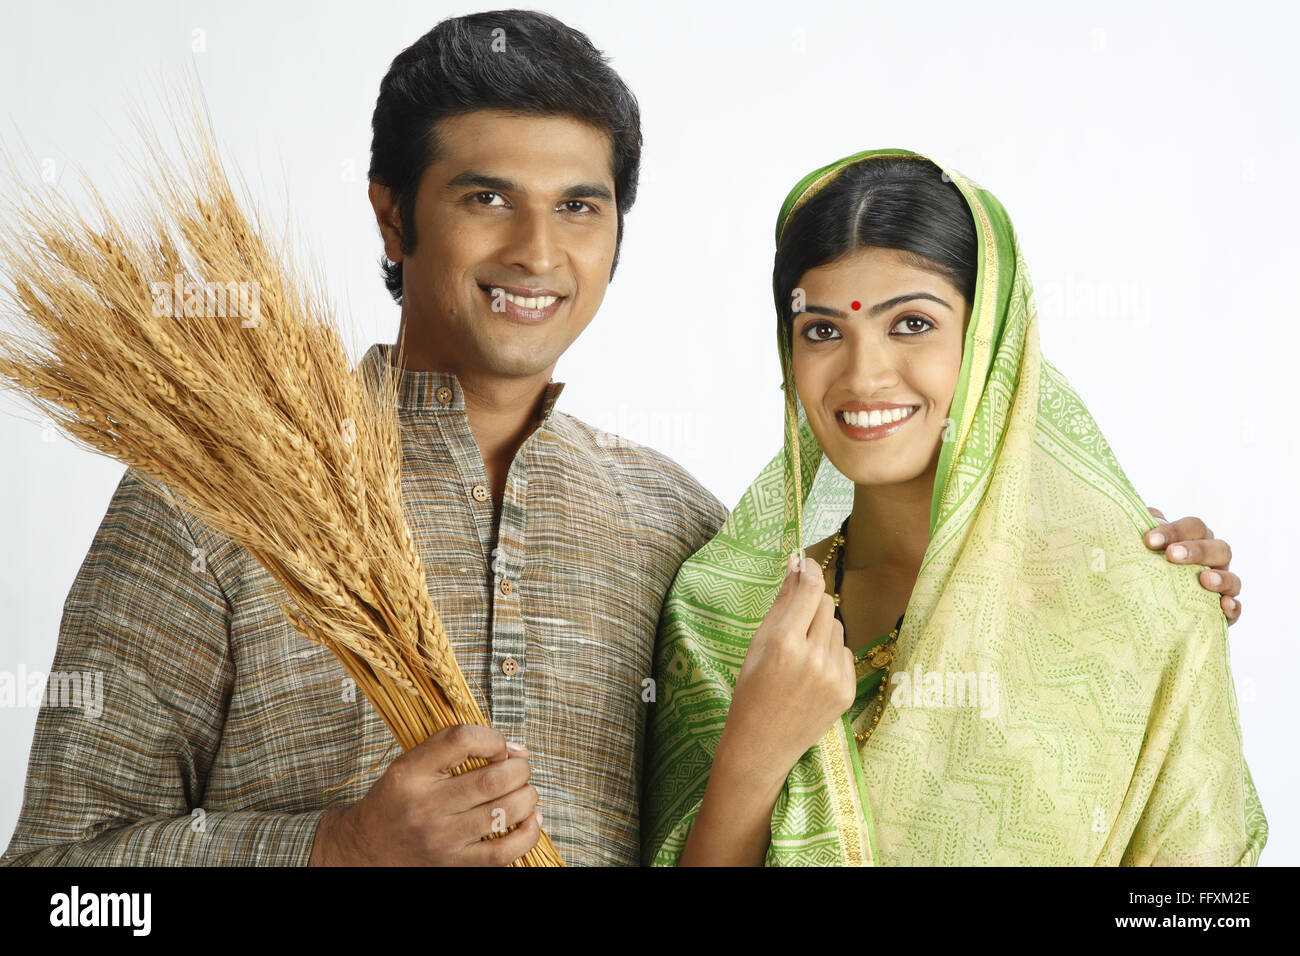 Rich Indian farmer and his wife holding harvested golden wheat crops MR#743A,743B Stock Photo